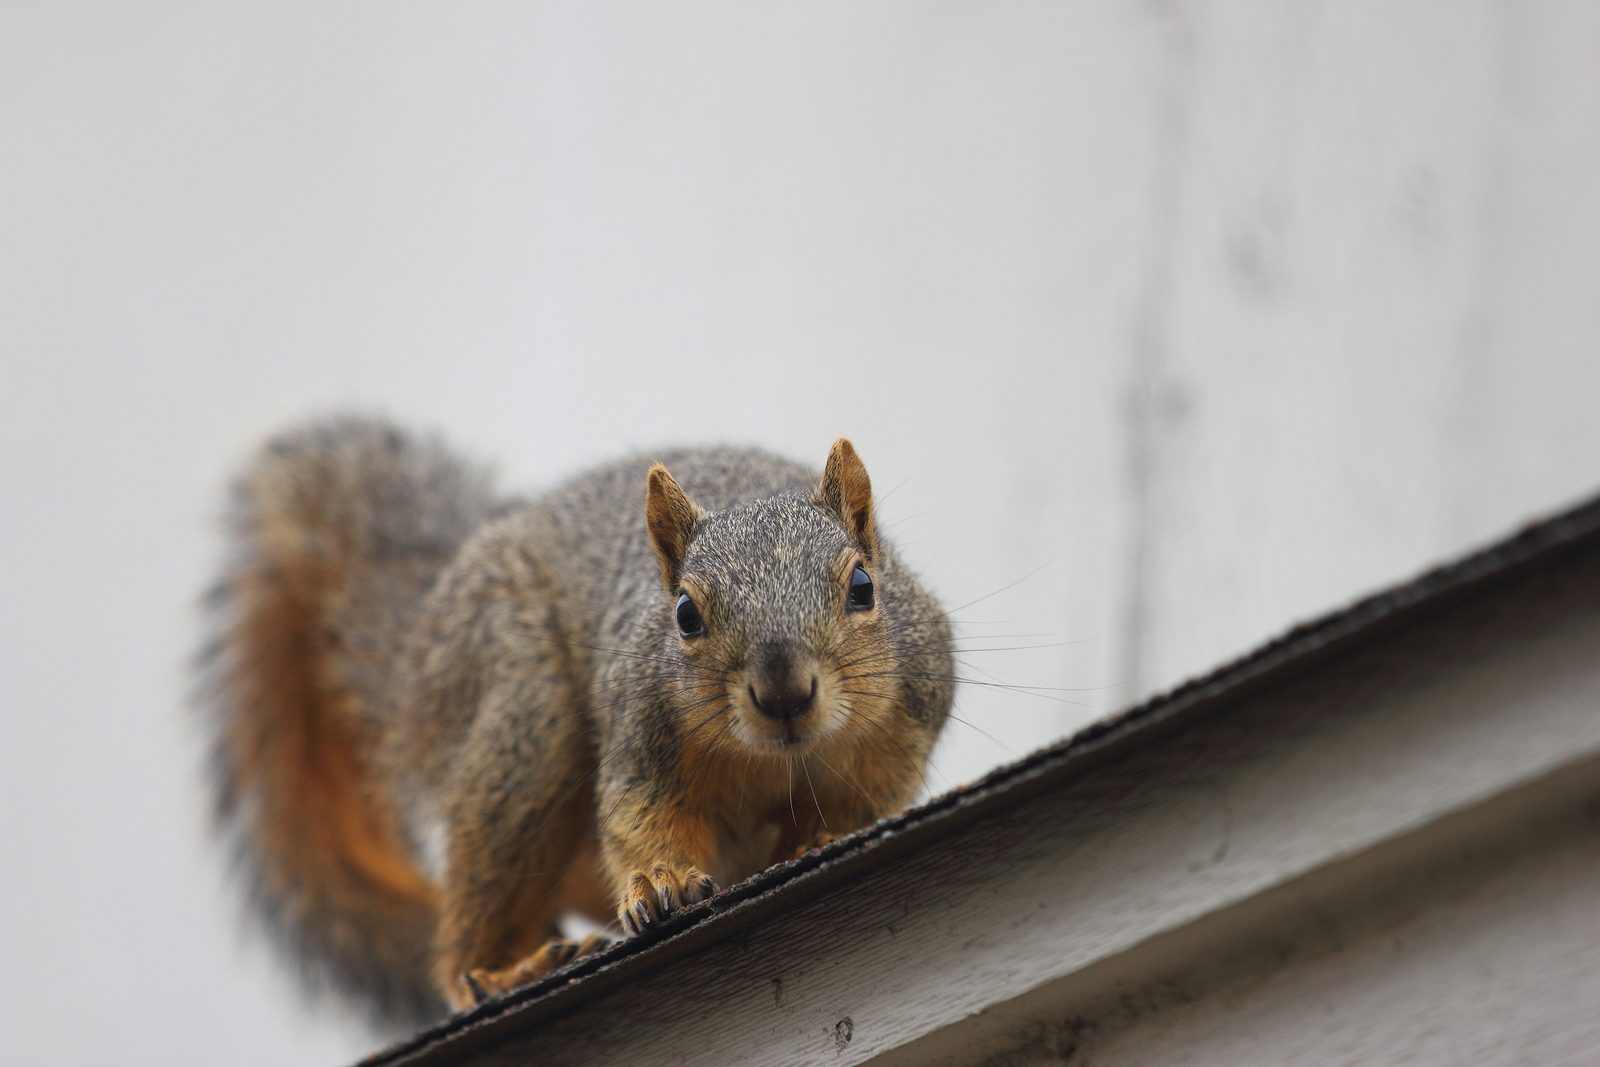 Getting Rid of Squirrels in the Attic